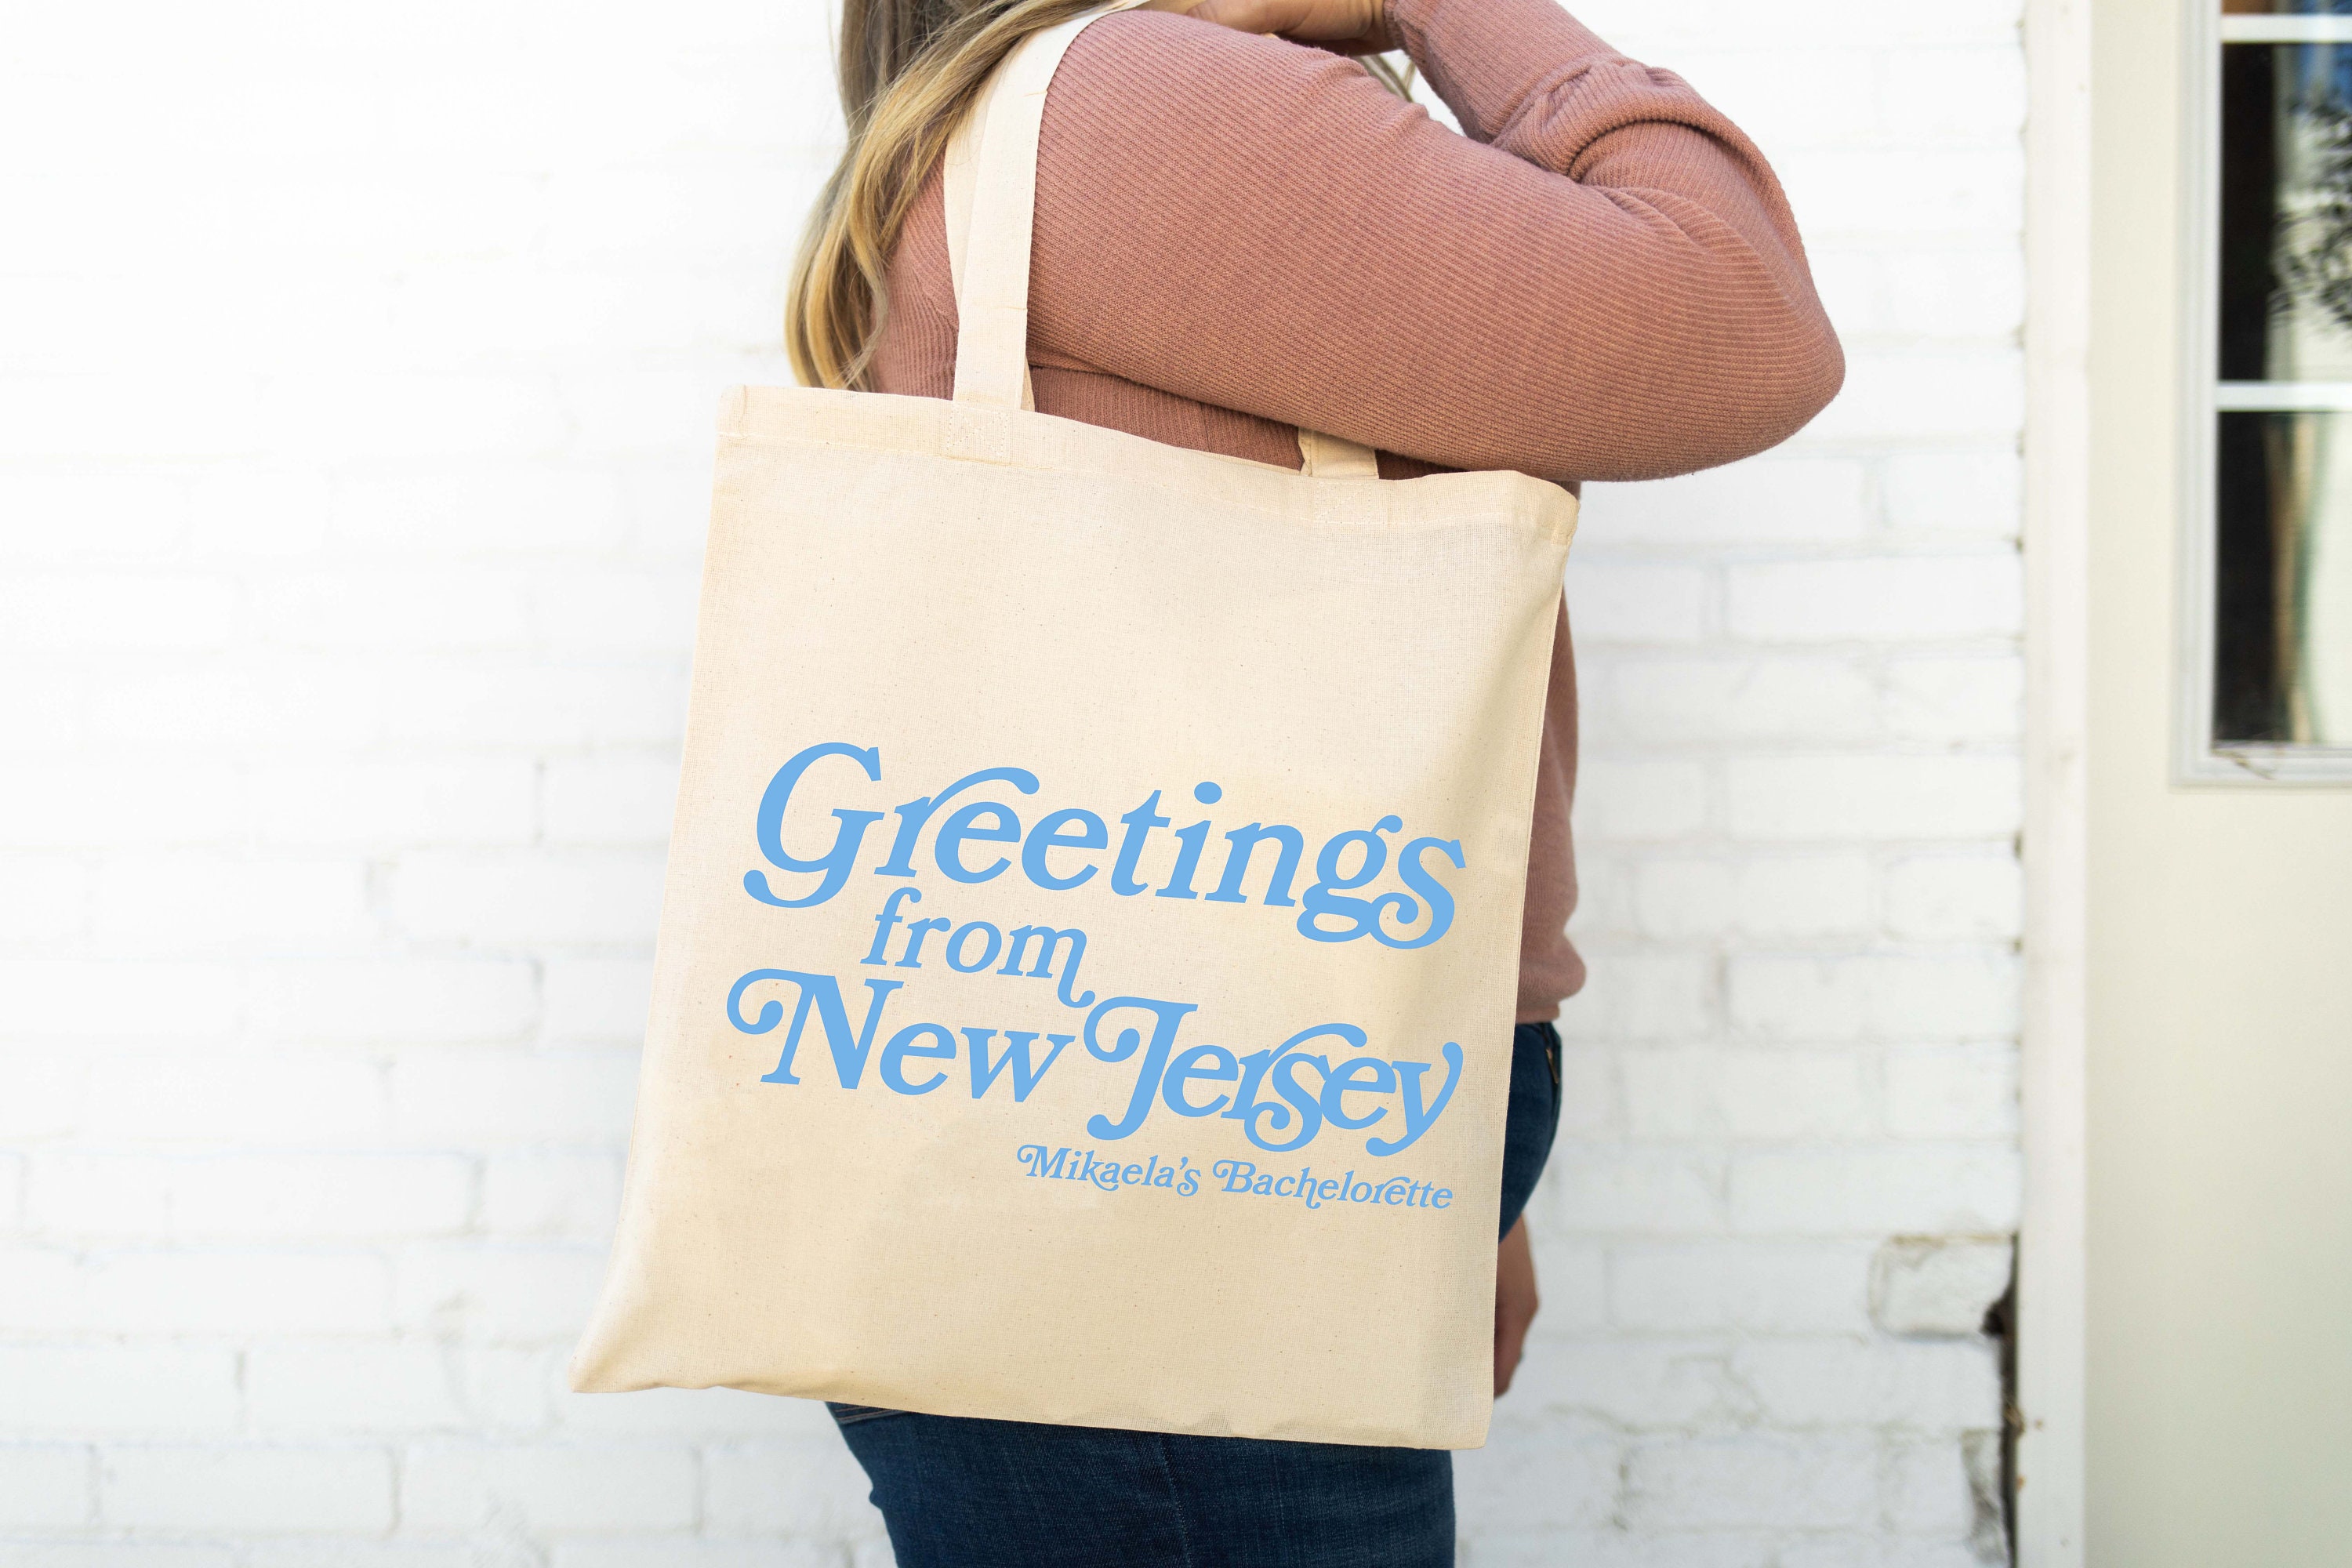 Thanks New Jersey Tote Bag (Black) – New Jersey Ink